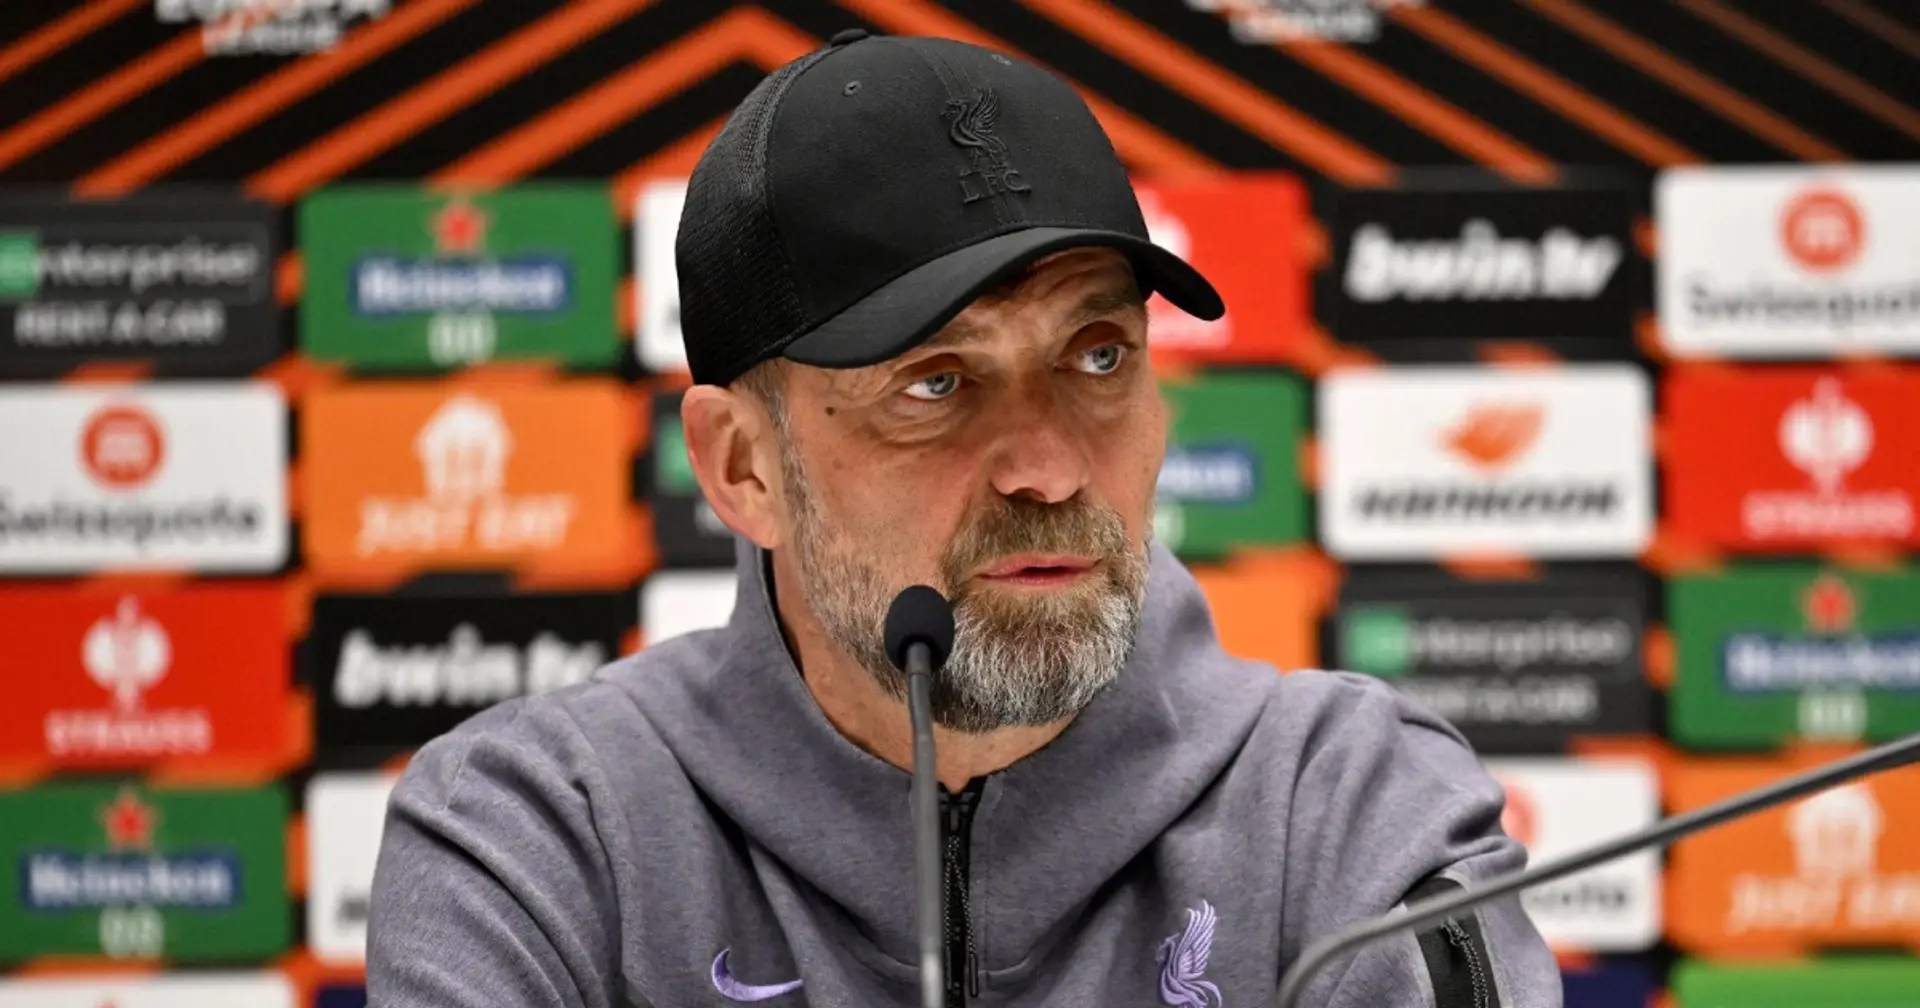 'The approach will not change': Jurgen Klopp on Liverpool's plan for Atalanta game 